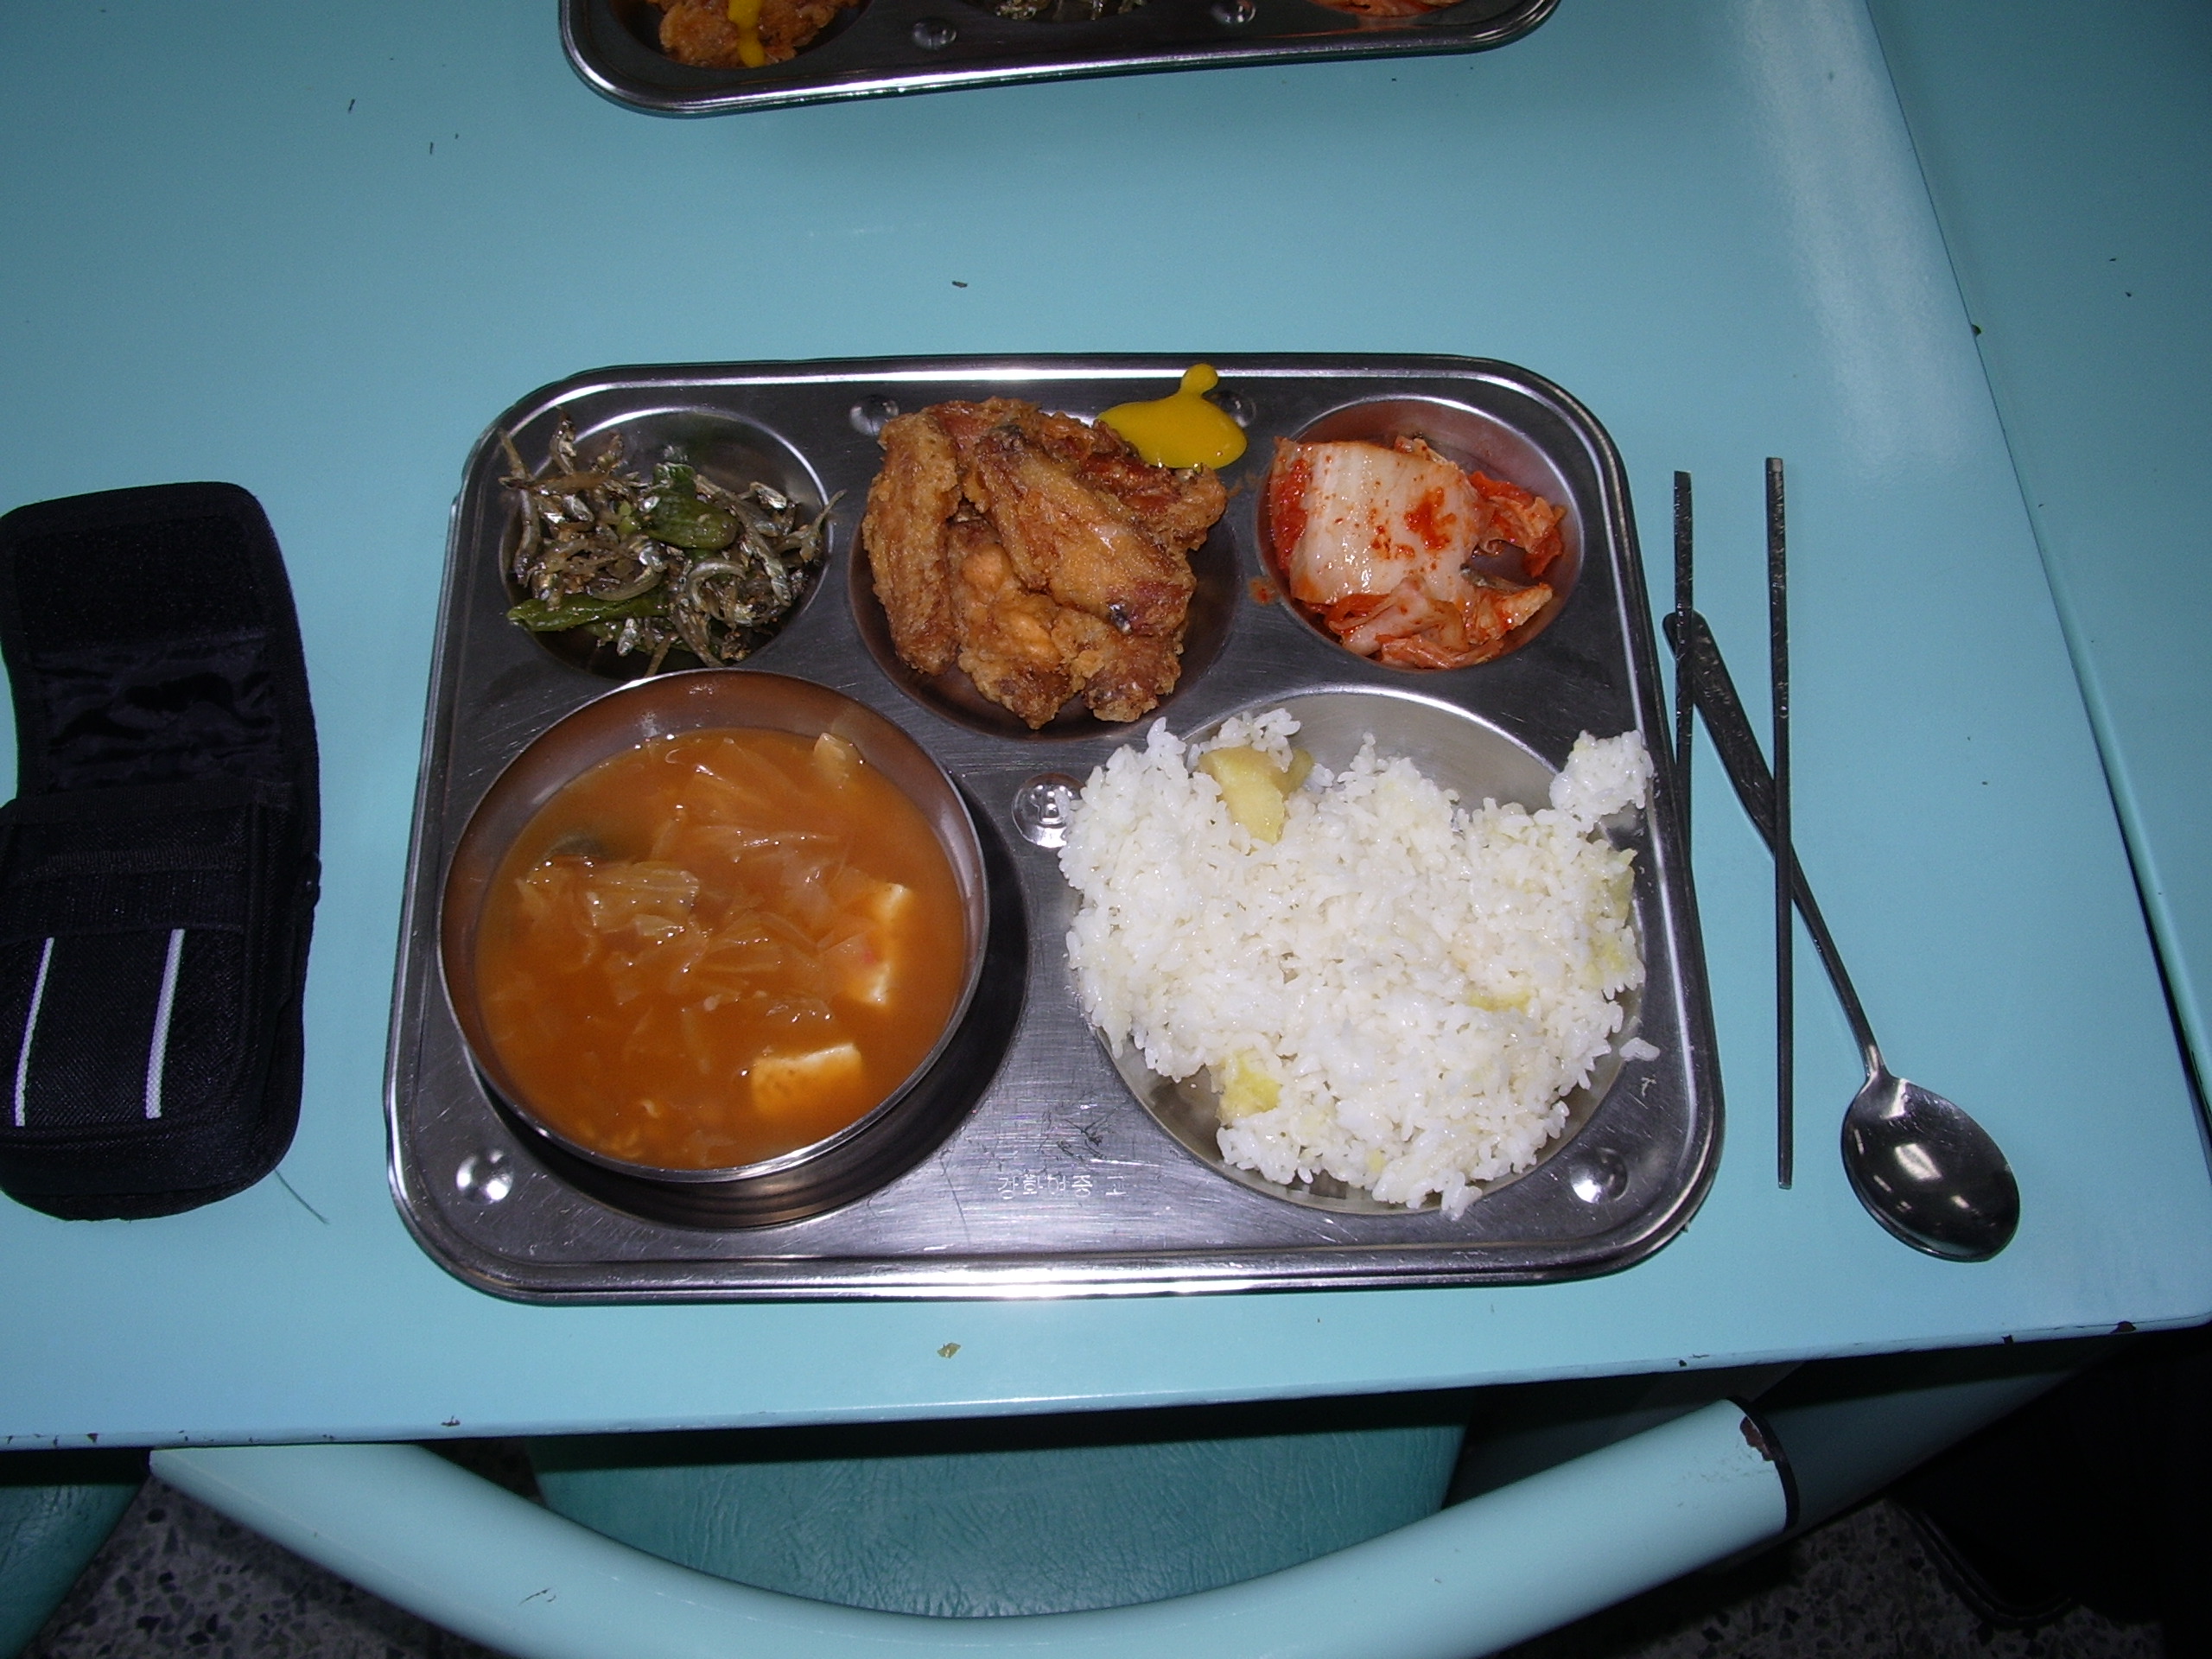 Daily pictures of life in Korea #35: Korean public school cafeteria lunch  tray